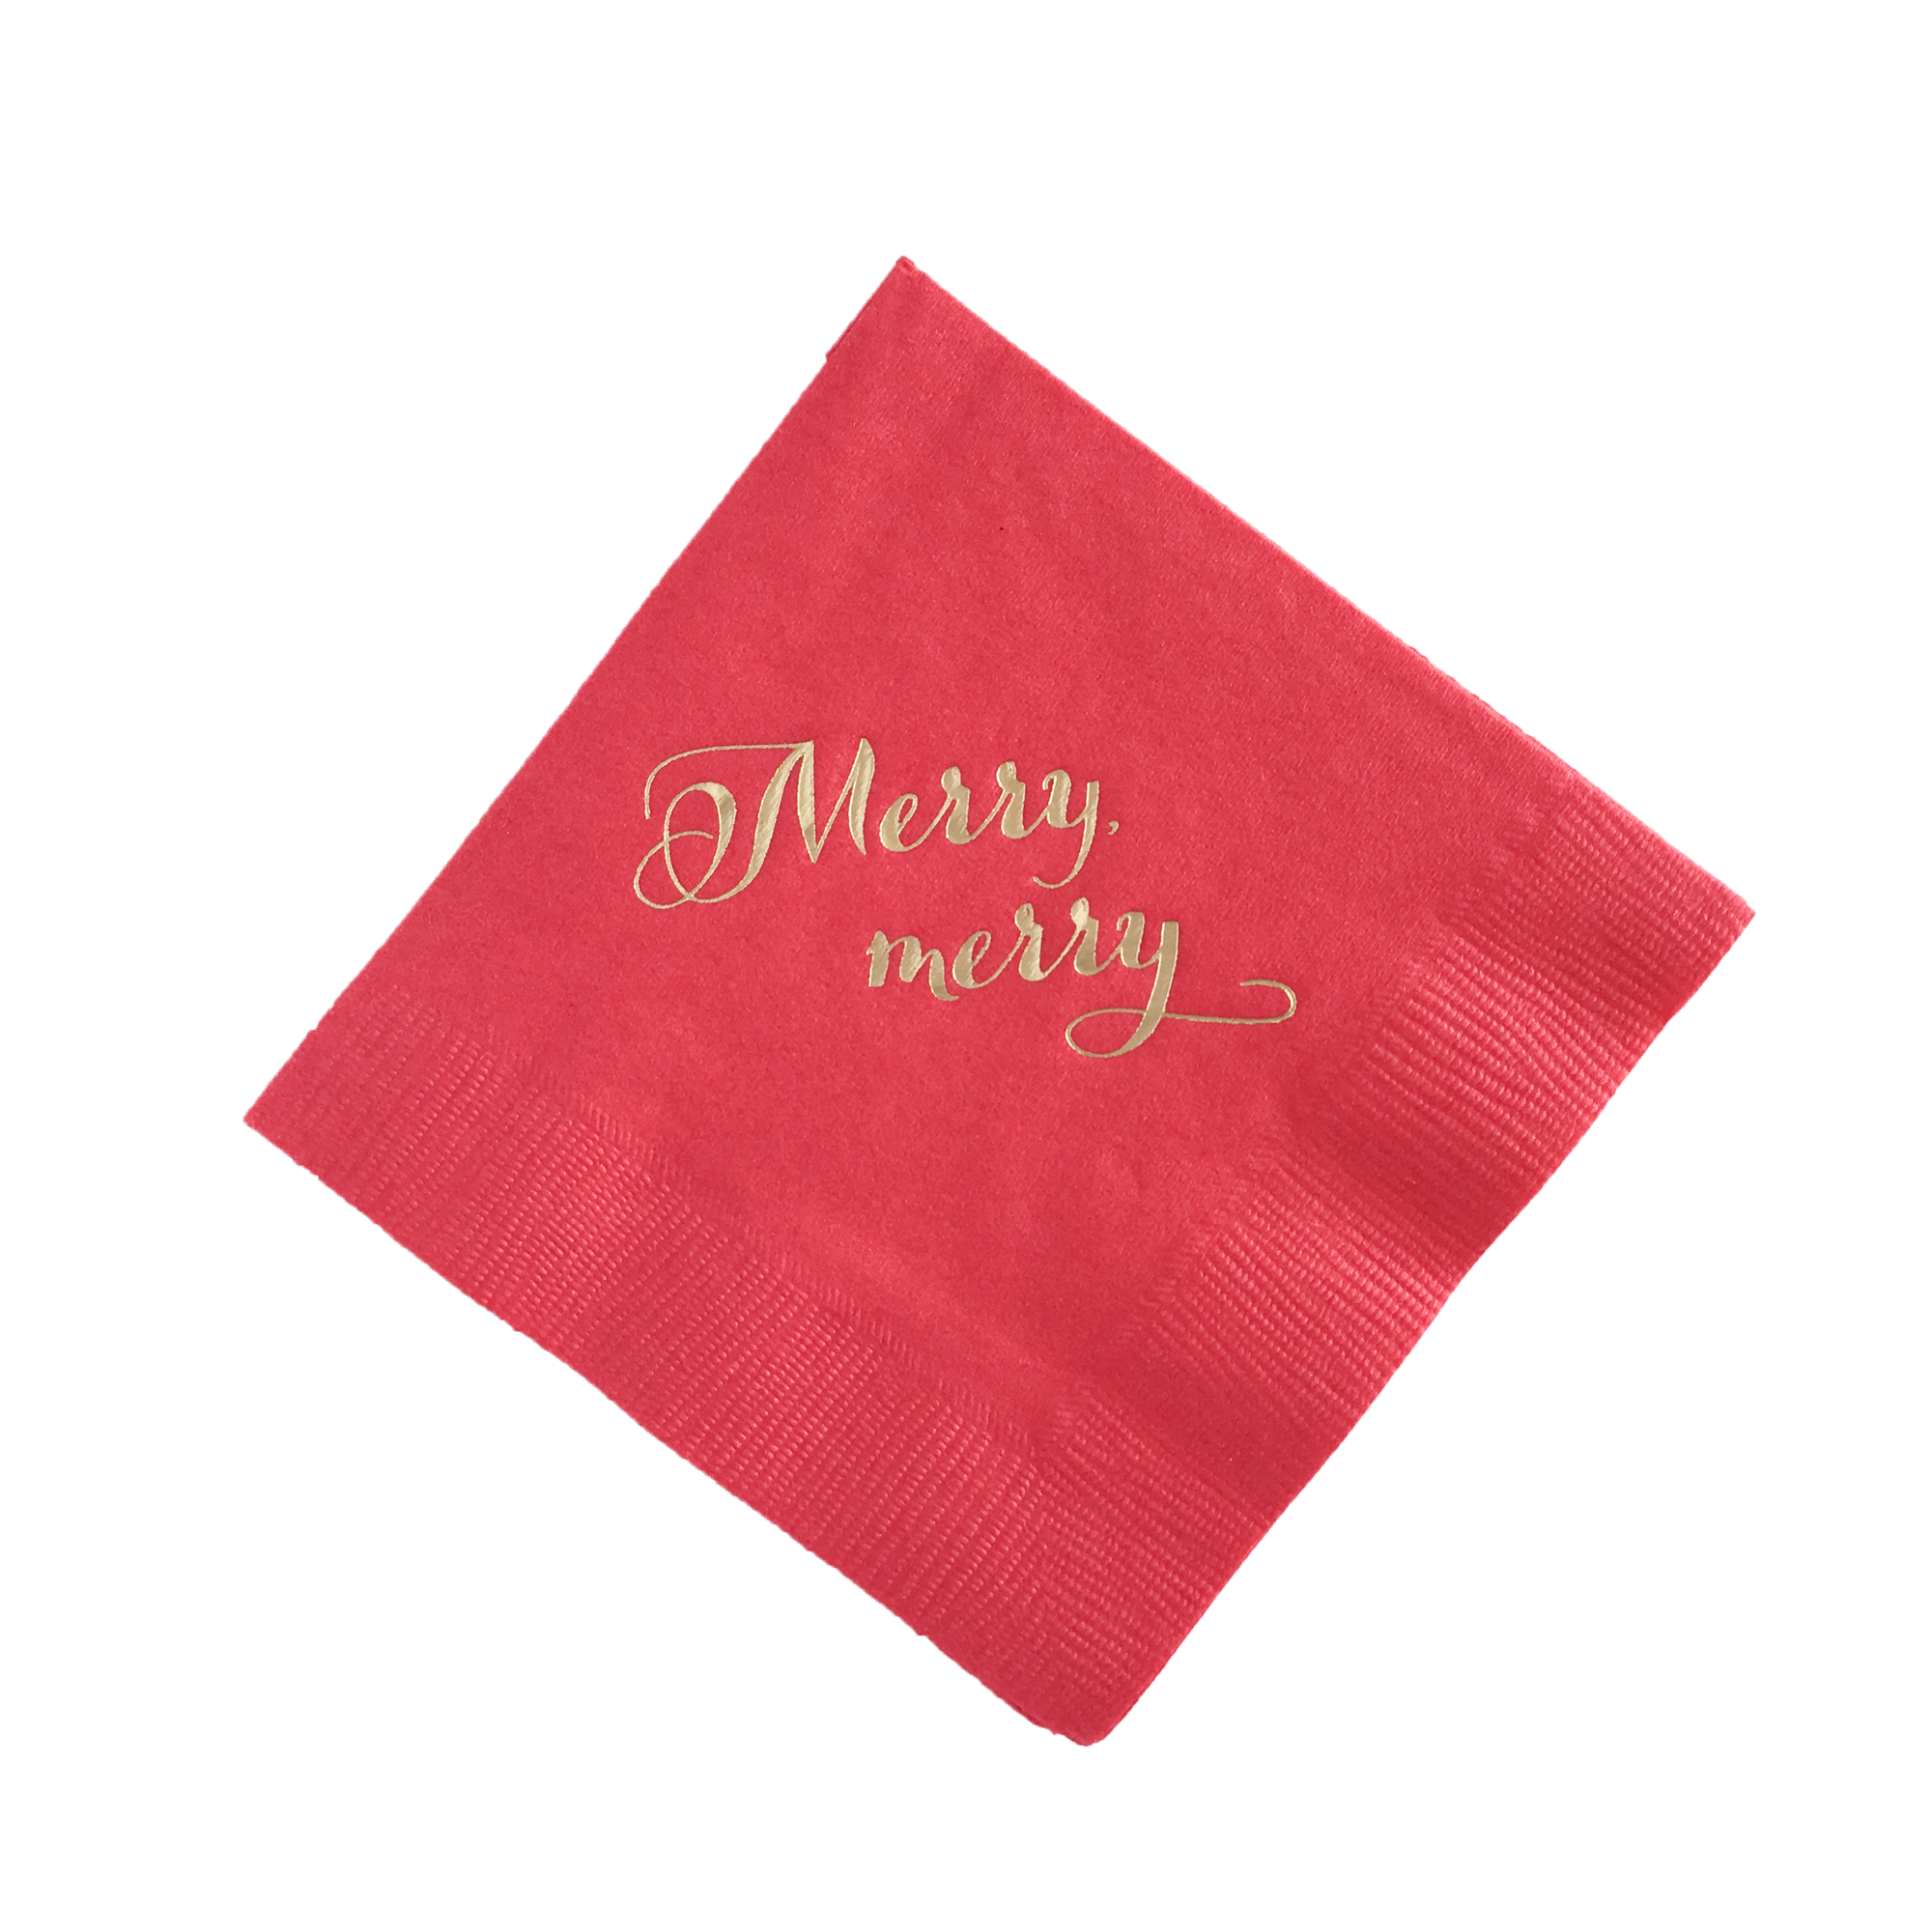 Merry merry Cocktail Napkins, Set of 25